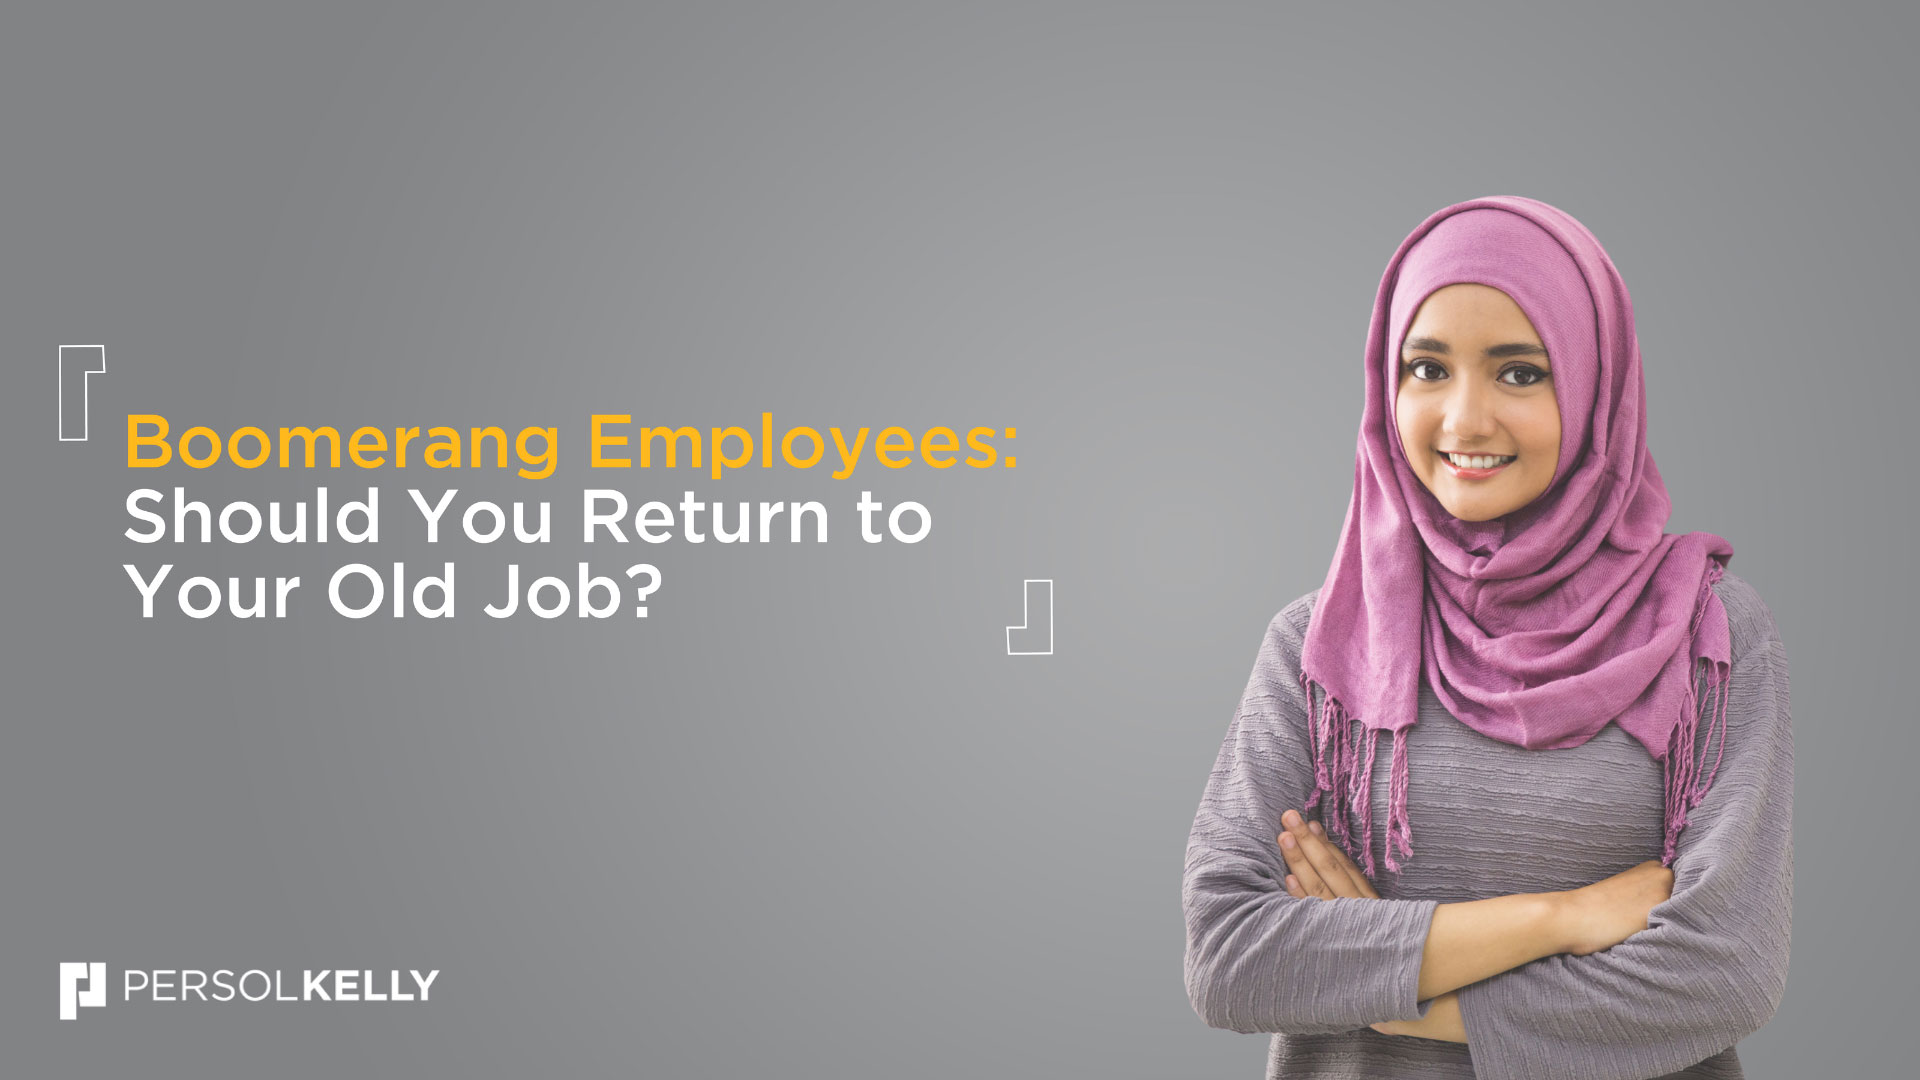 Boomerang Employees: Should You Return to Your Old Job?